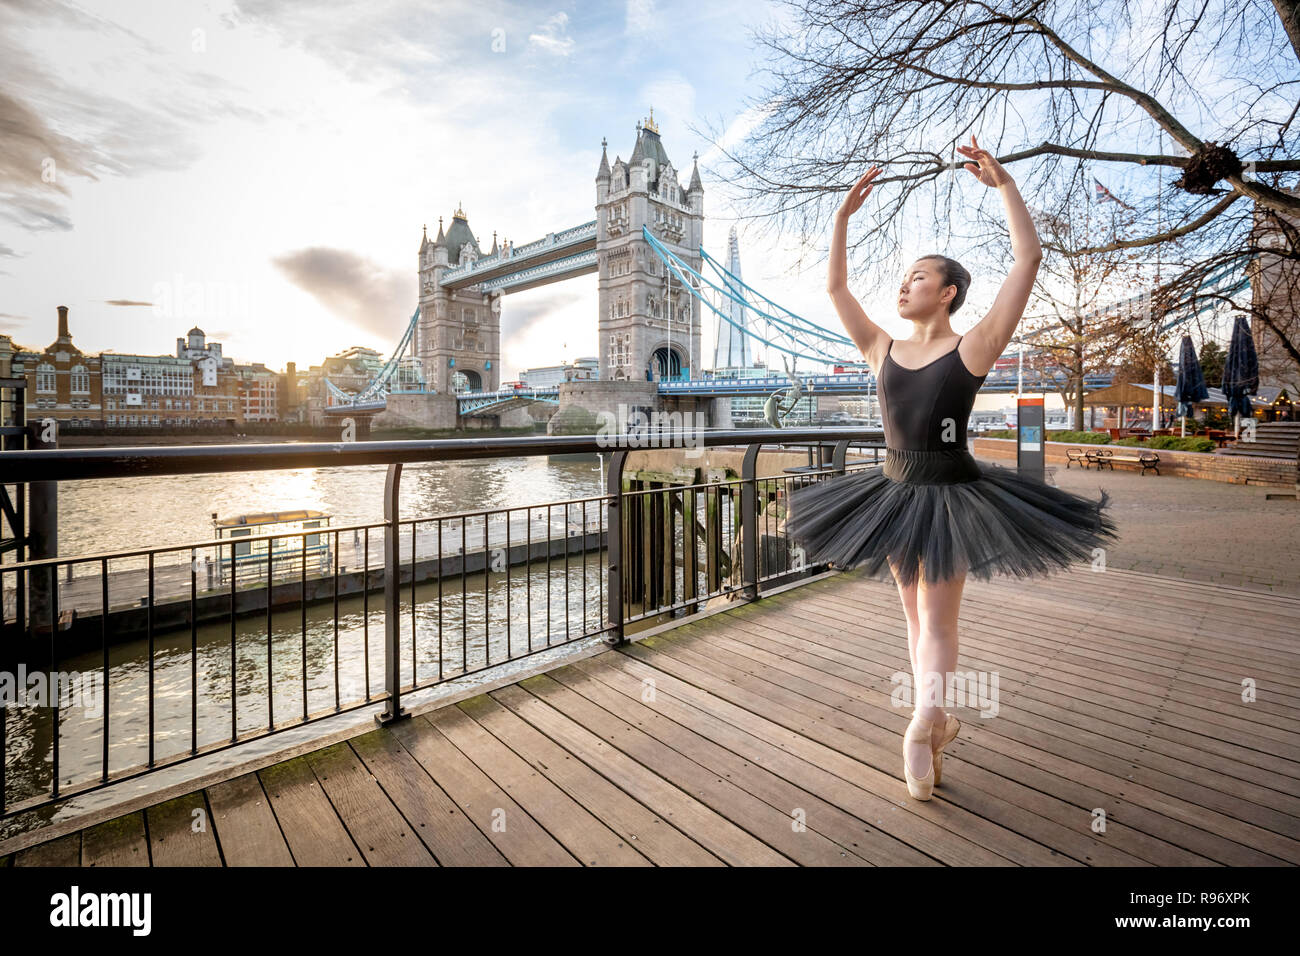 London, UK. 20th December, 2018. Dancers from Semaphore Ballet Company perform at Tower Hill in the last evening sun before the winter solstice. Tonight will be the longest night of the year with the sun not rising until 08:03 GMT on Friday morning. Dancer pictured: Natsuki Uemura. Credit: Guy Corbishley/Alamy Live News Stock Photo